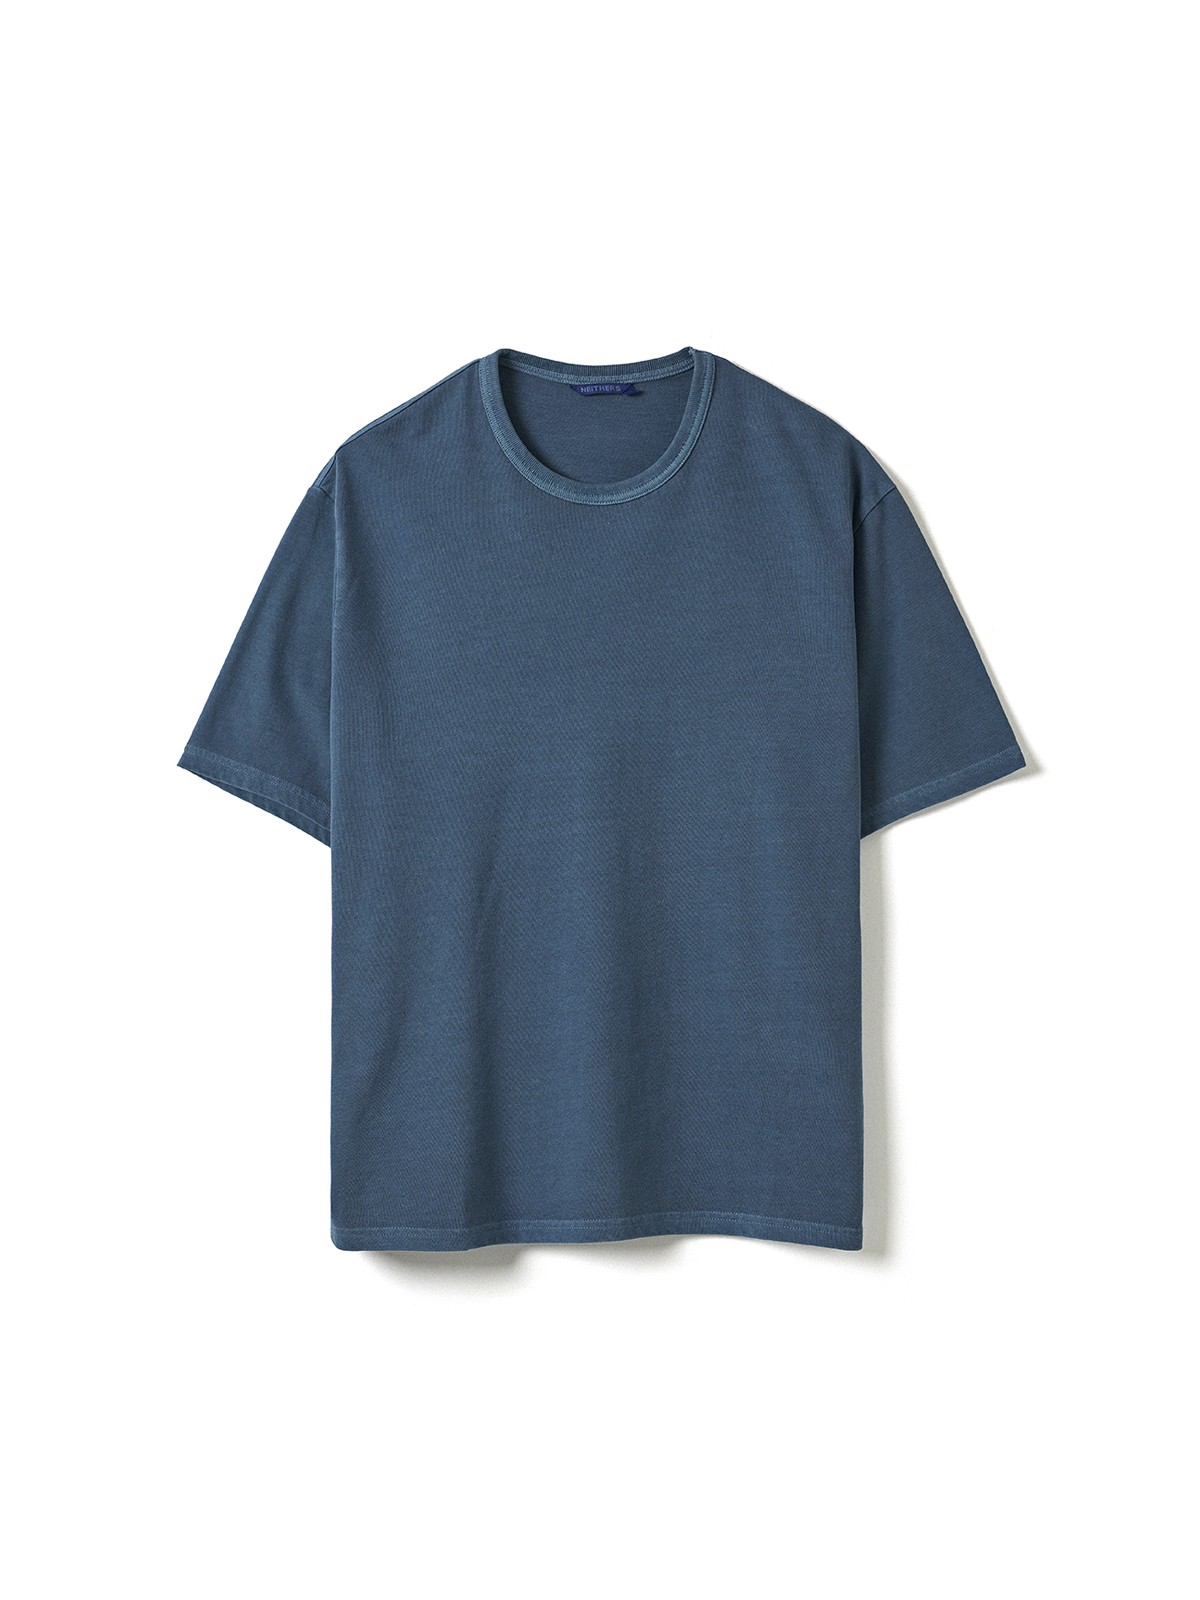 [WED TALKS EVENT] GARMENT DYED S/S T-SHIRT (HEATHER NAVY)